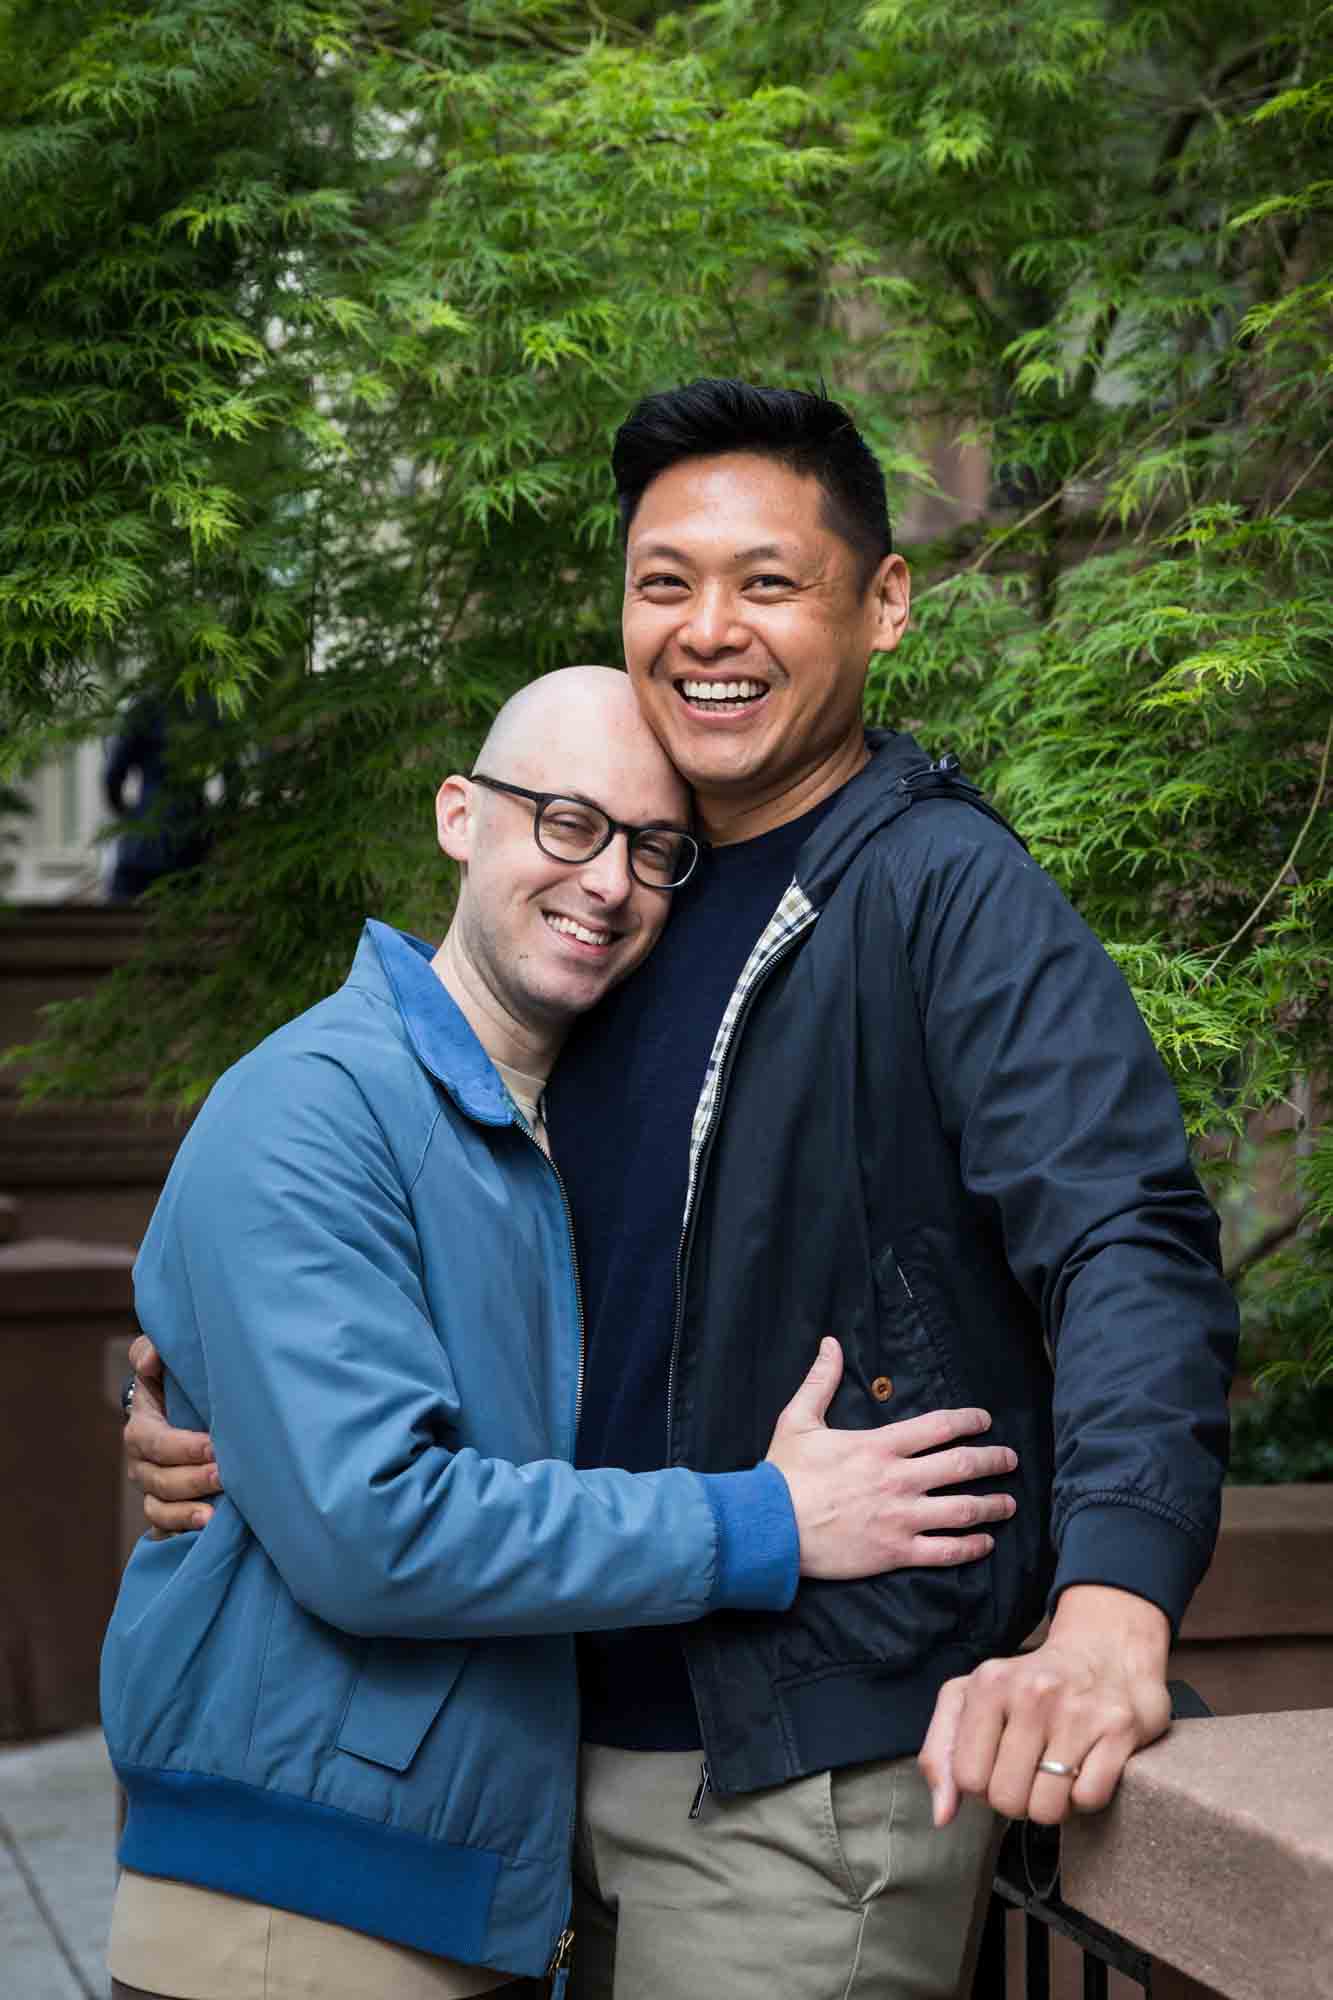 Two men hugging on sidewalk with tree in background